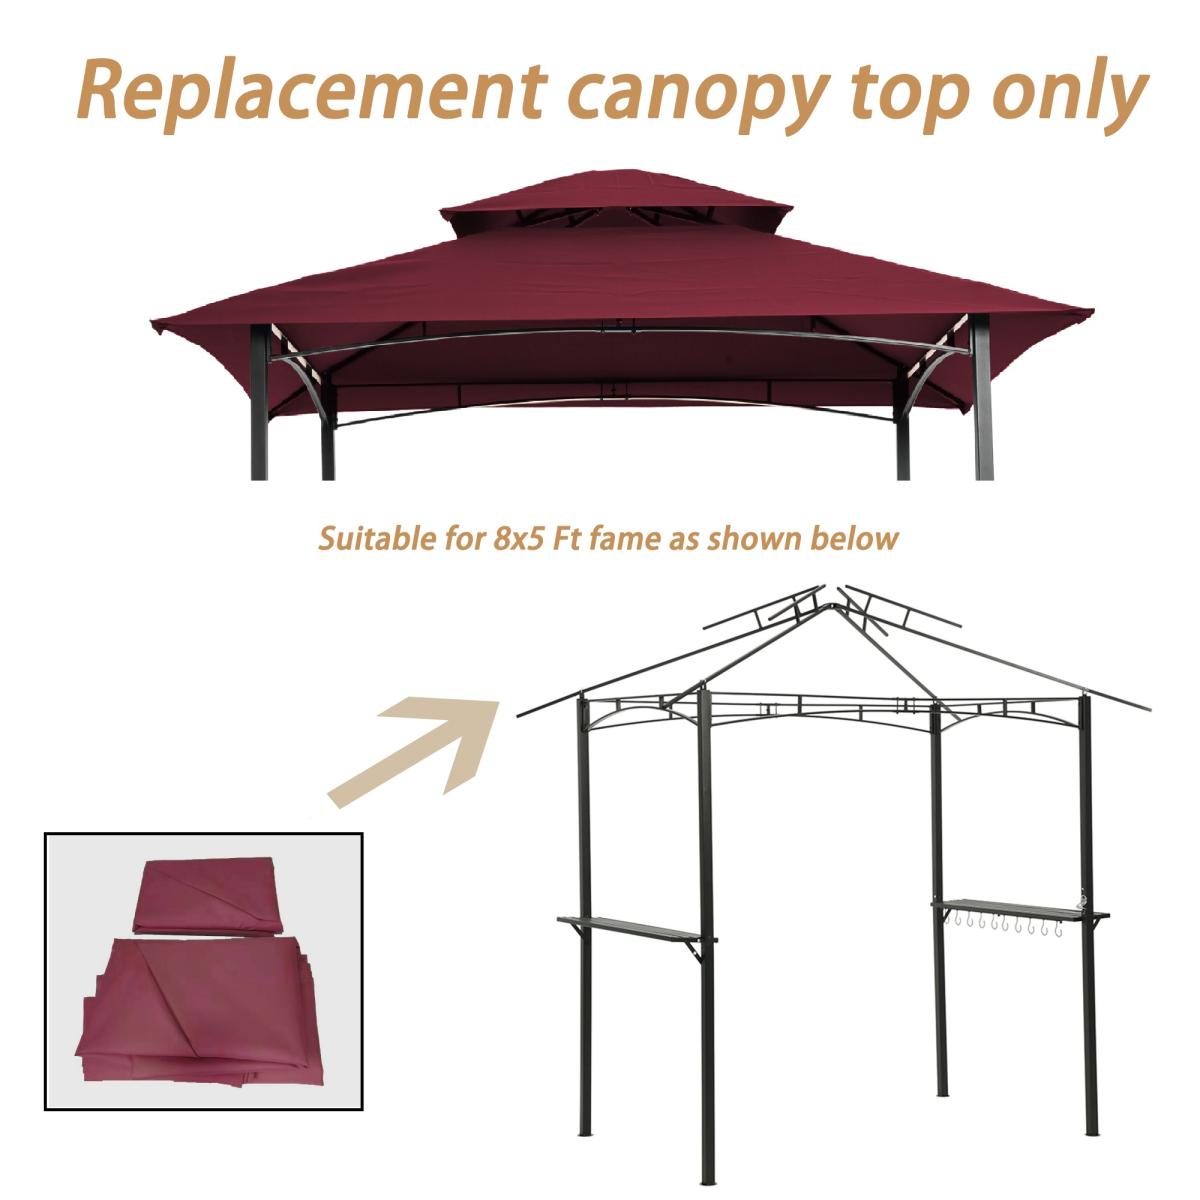 8x5Ft Grill Gazebo Replacement Canopy,Double Tiered Bbq Tent Roof Top Cover,BURGUNDY